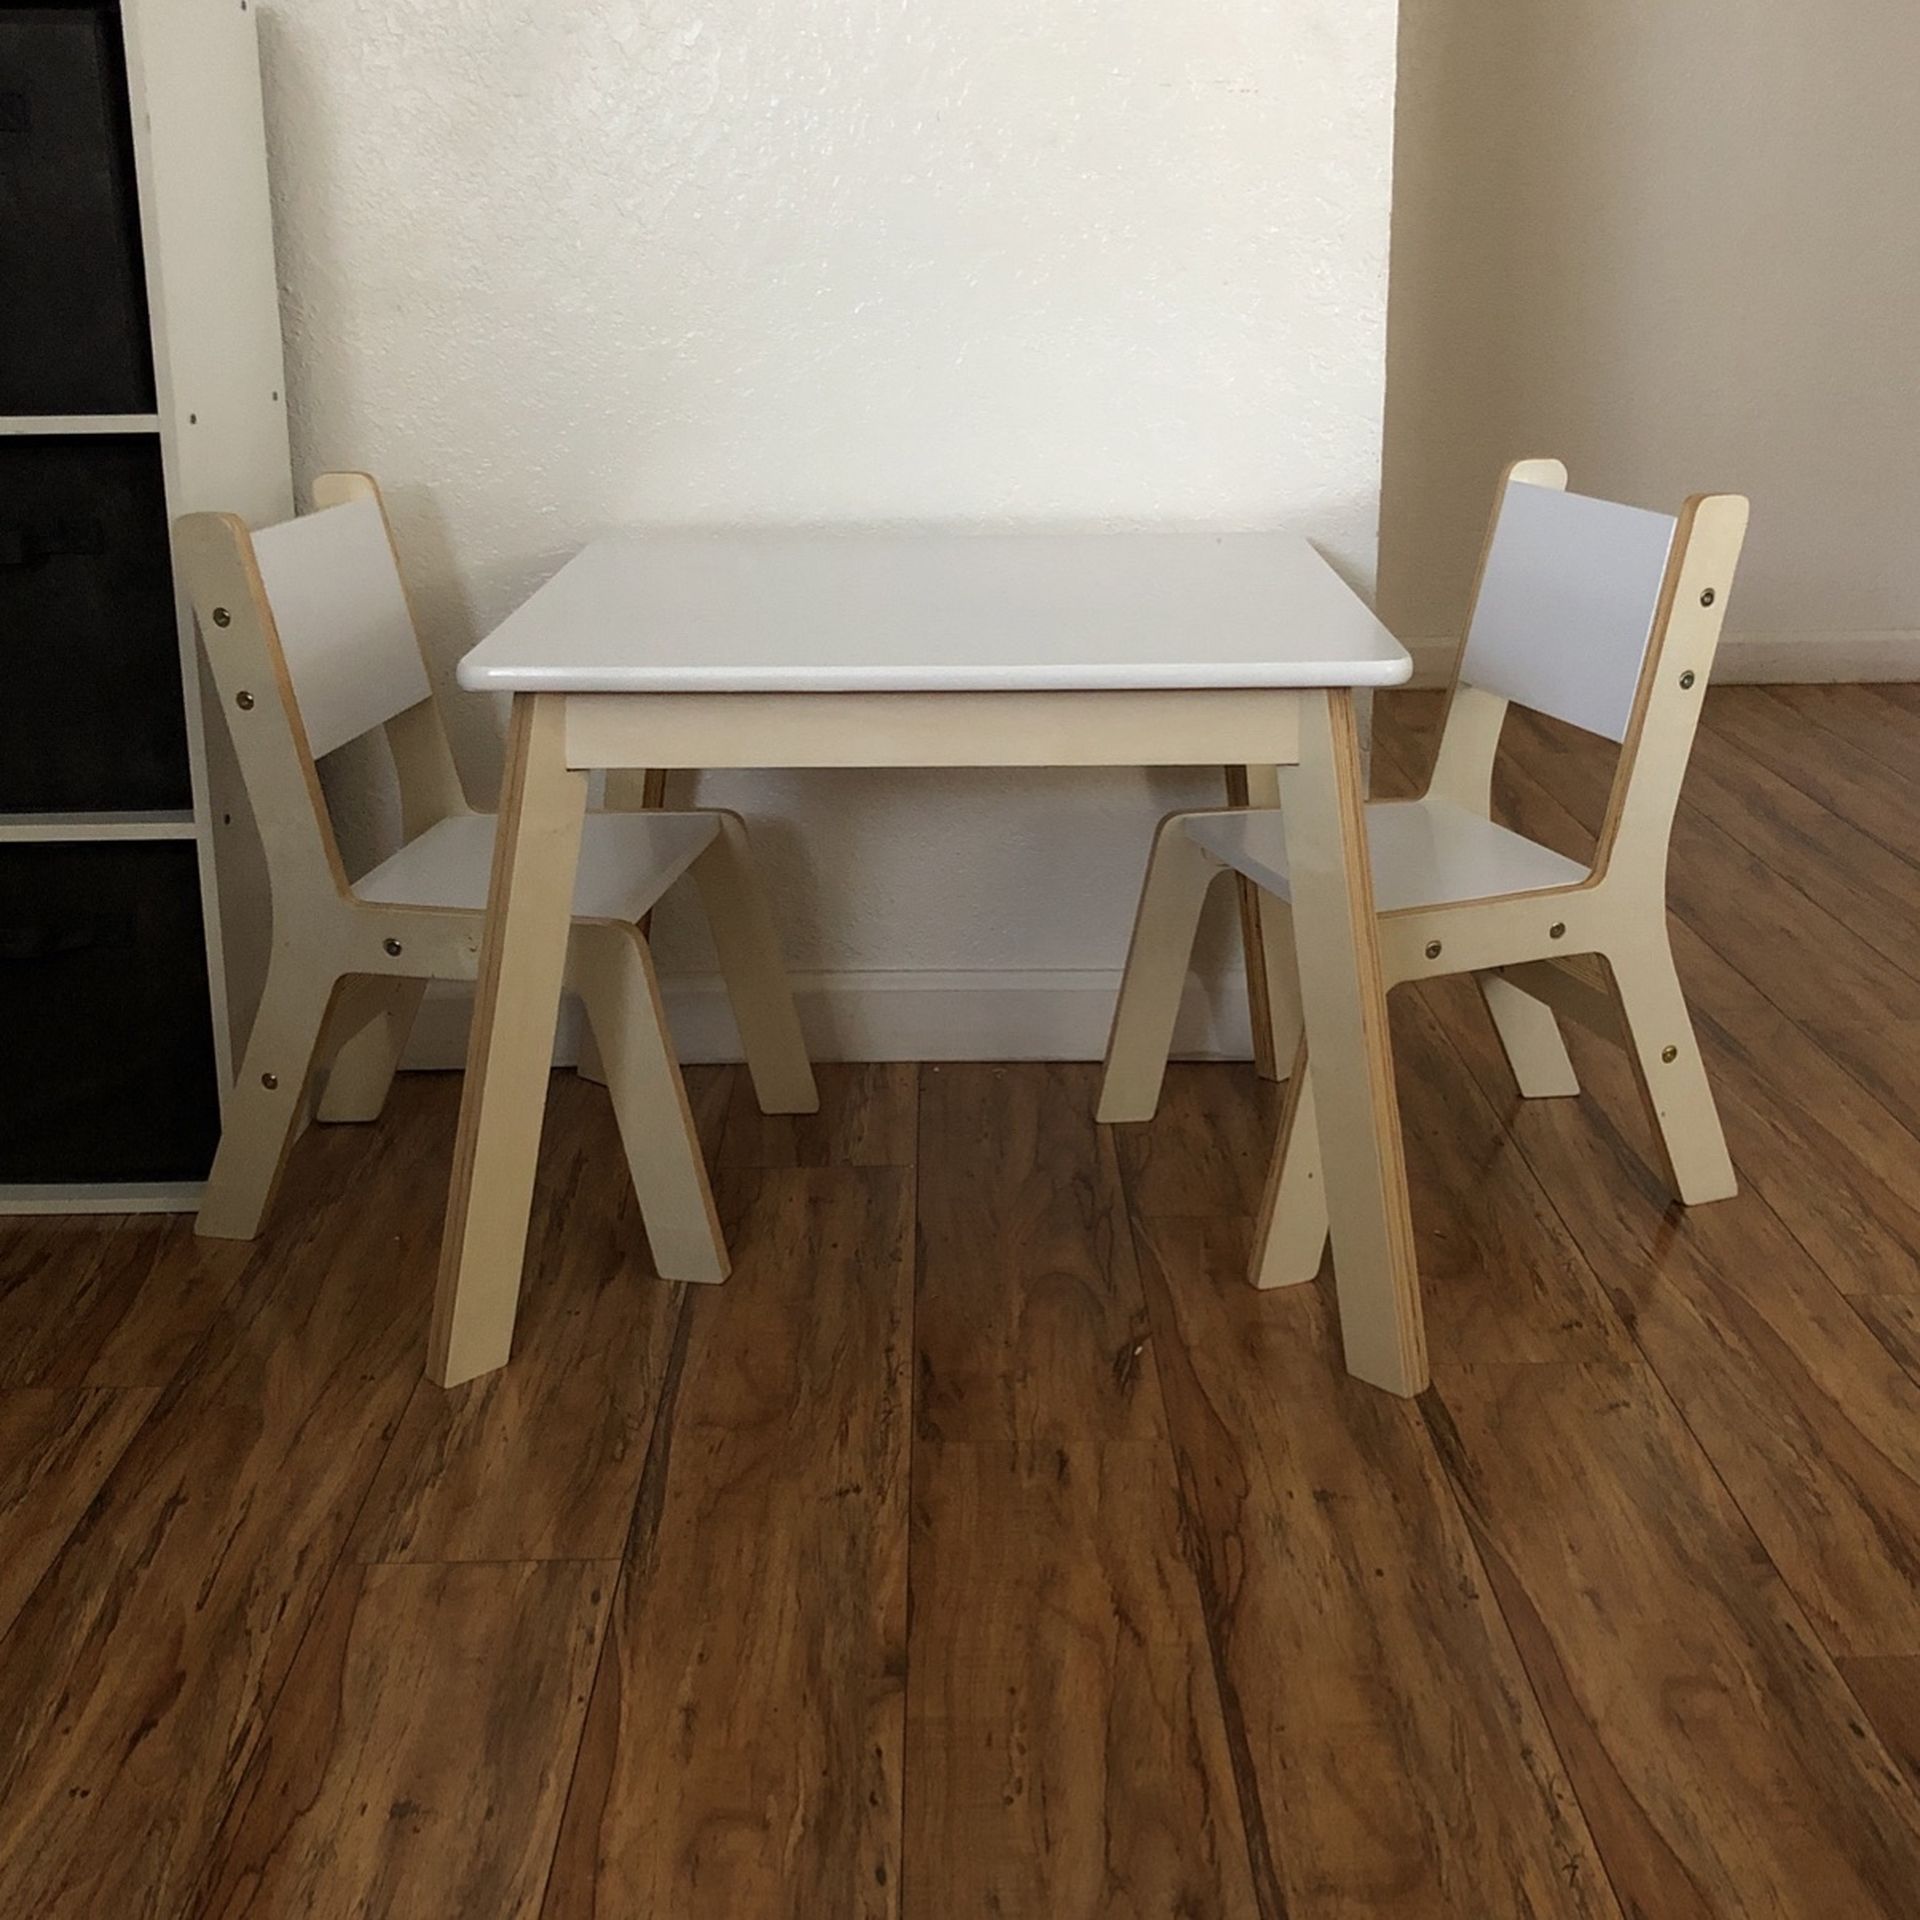 Kids table with 2 matching chairs